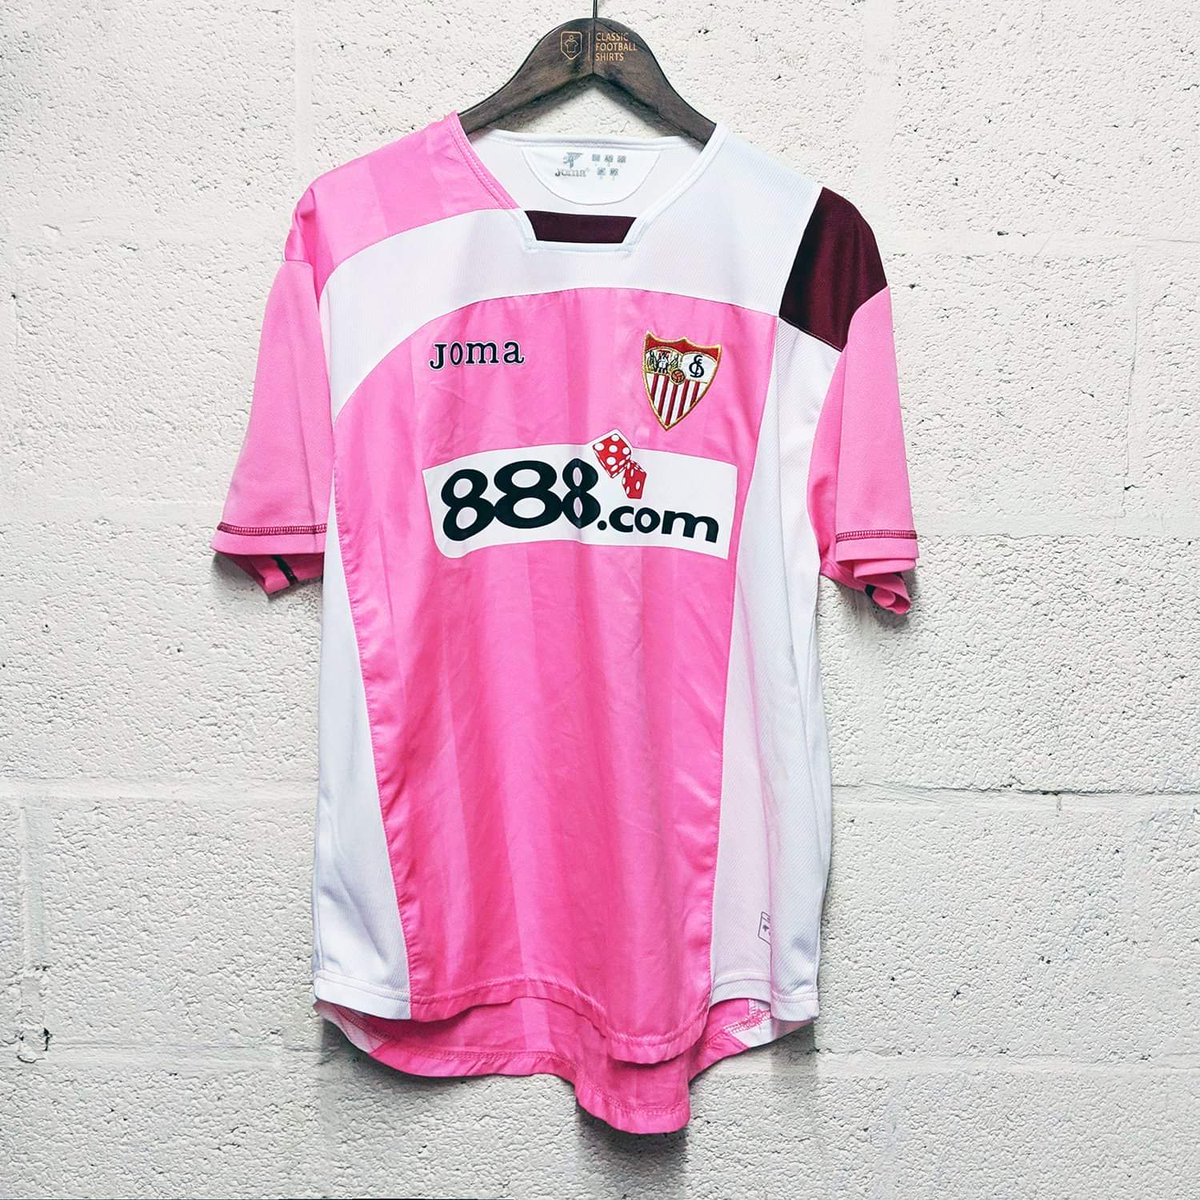 football jersey pink colour